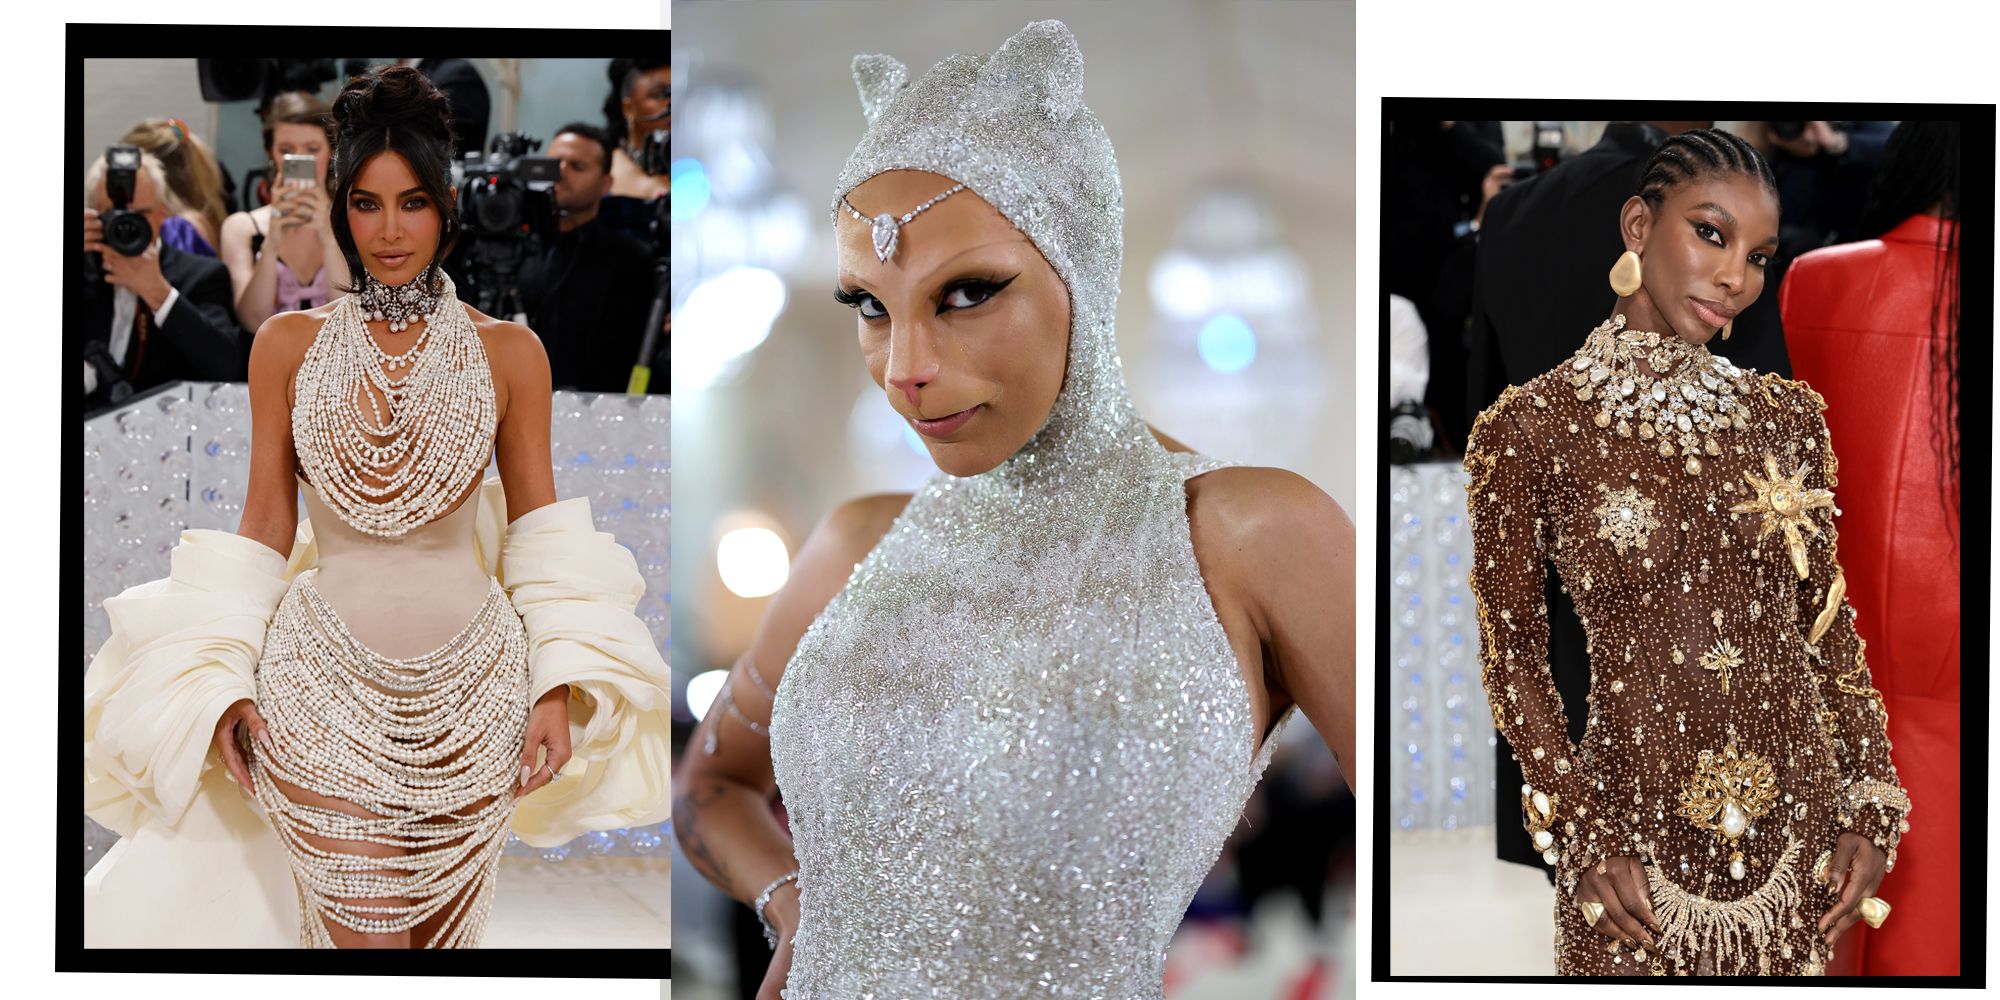 The best Met Gala jewellery looks this year are all about pearls